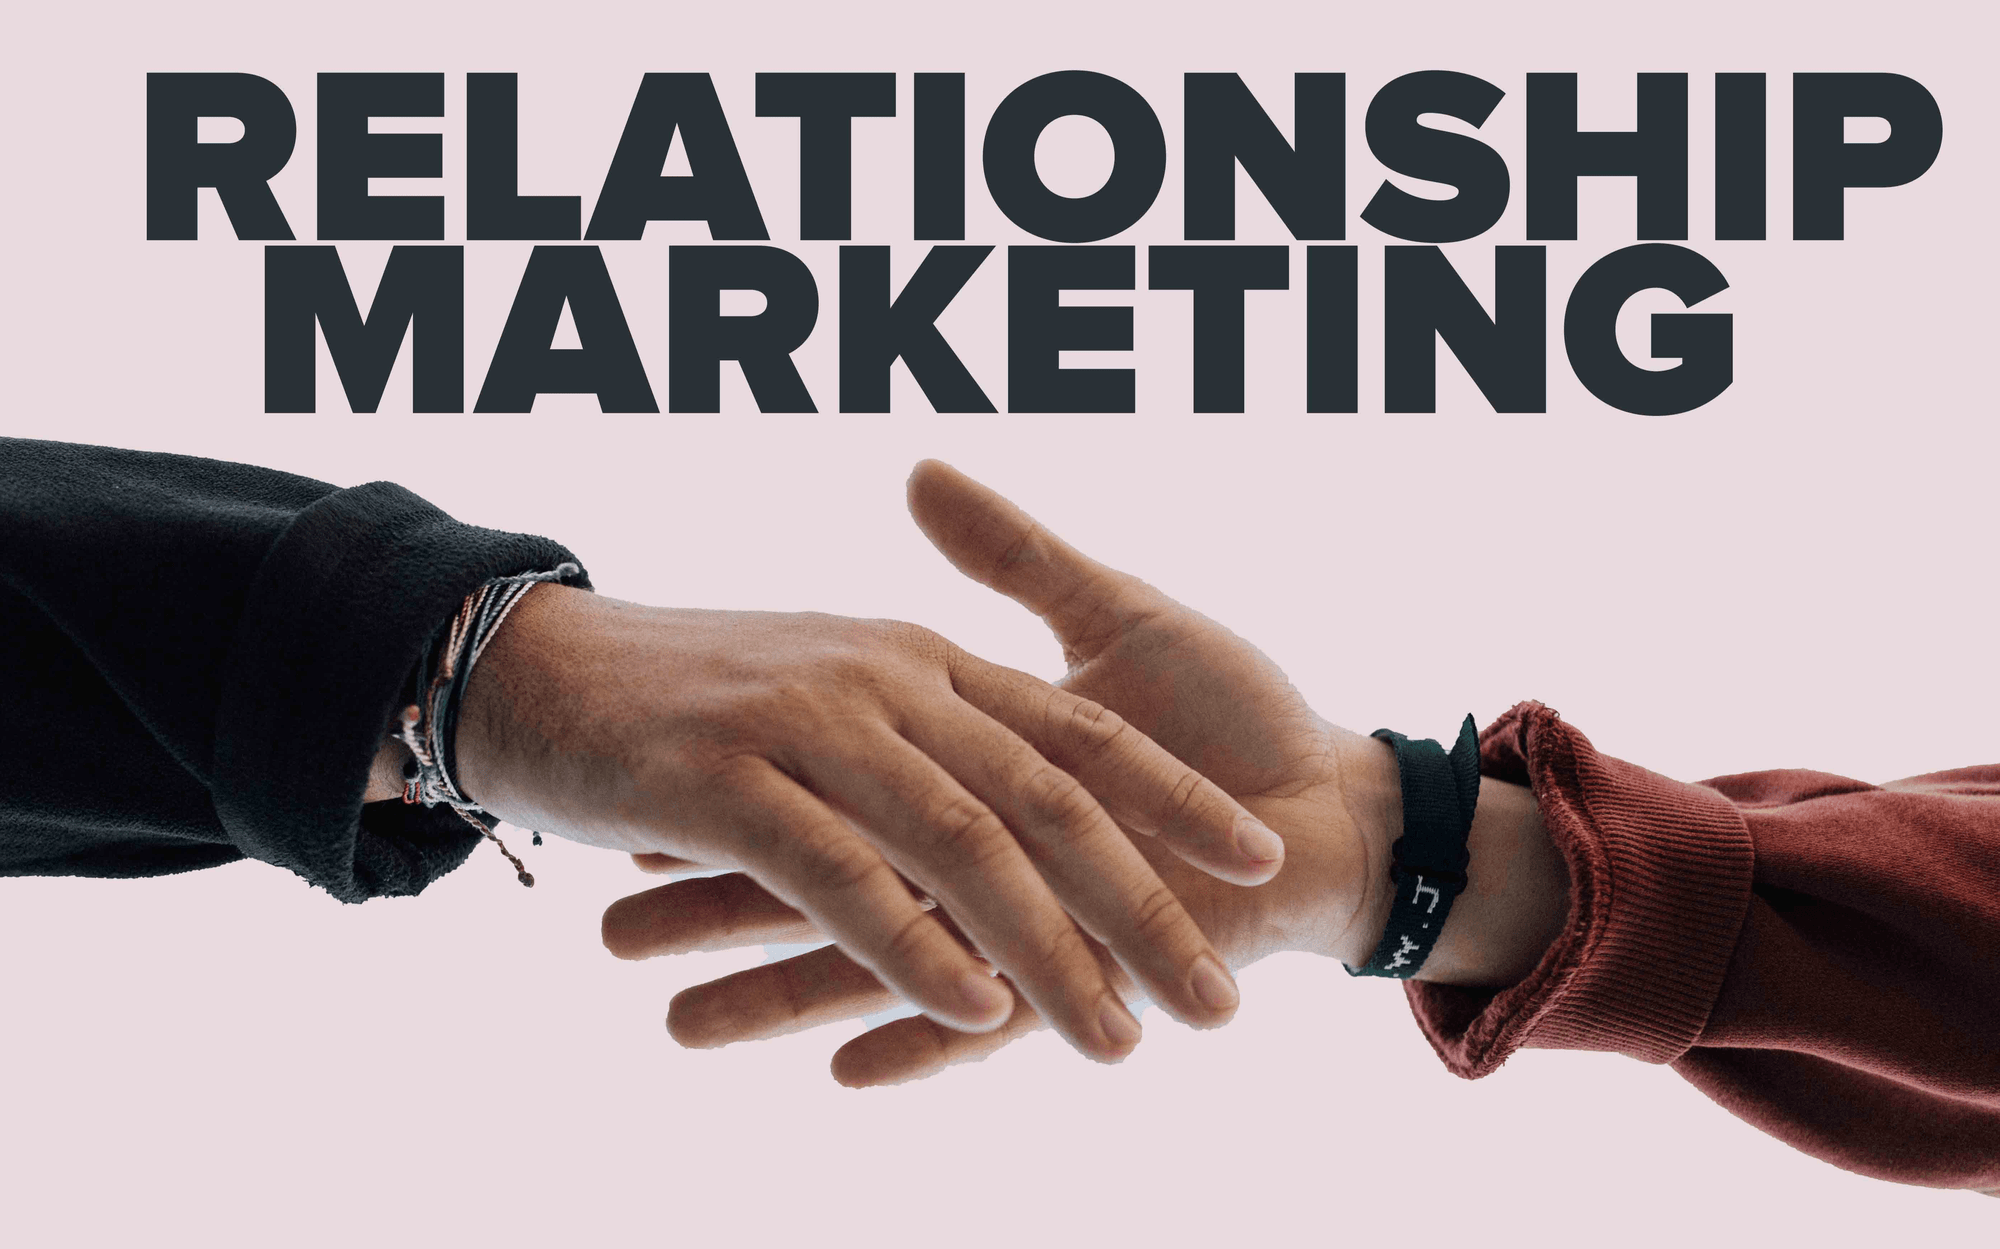 what is the aim of relationship marketing